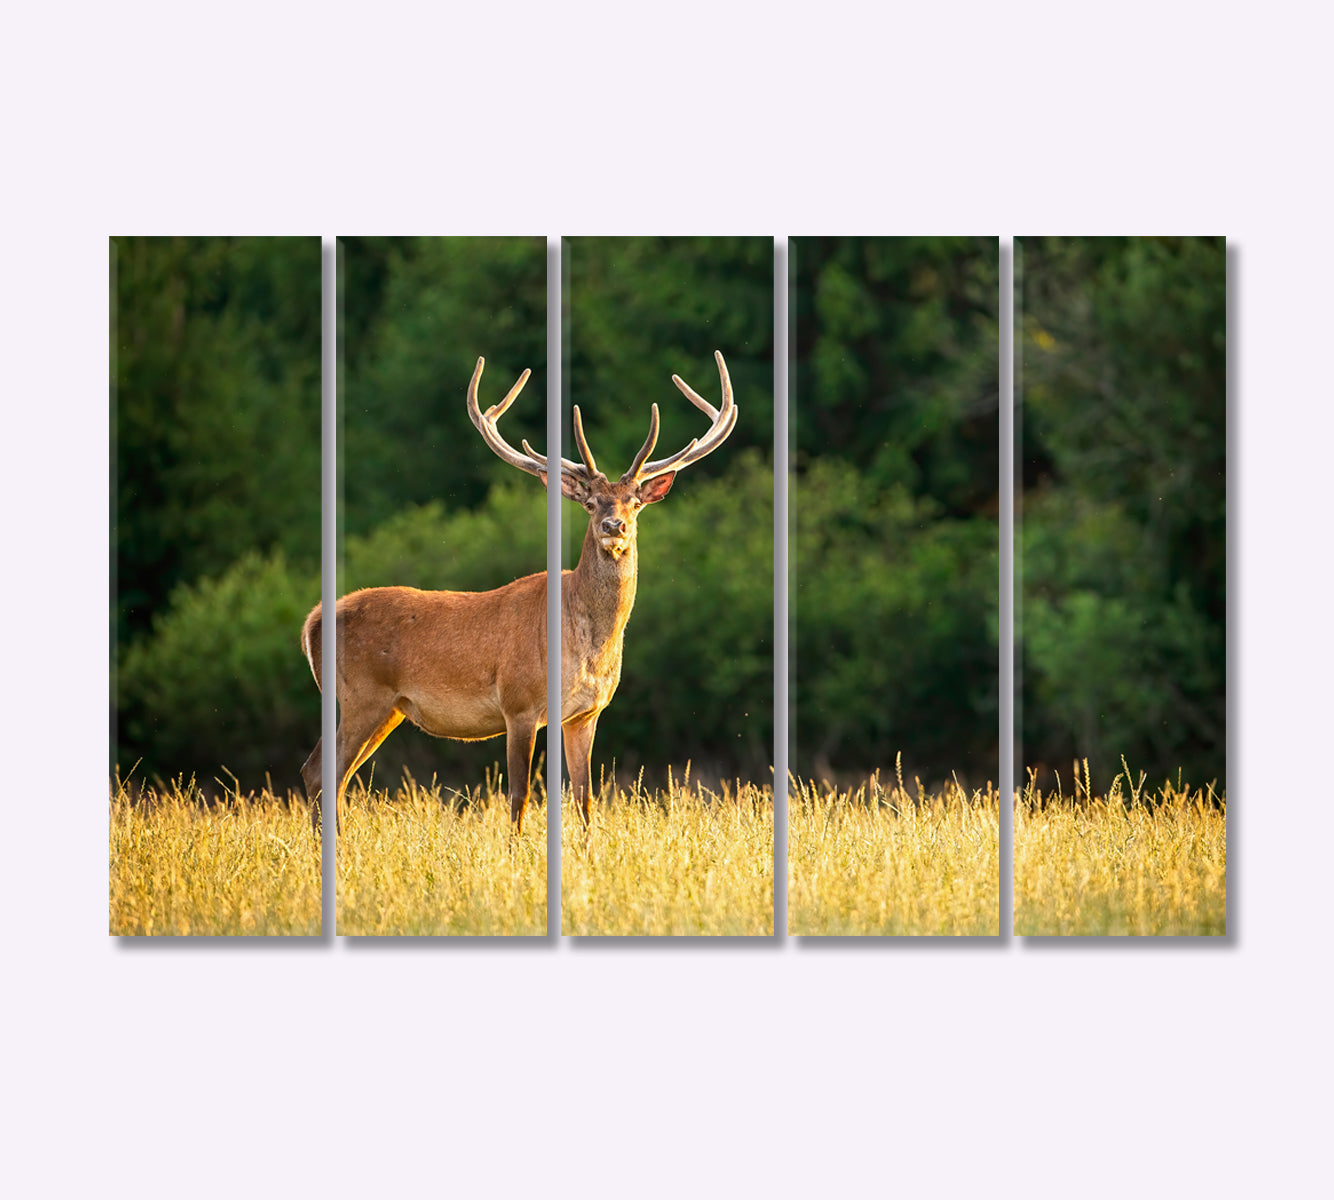 Deer in the Field Canvas Print-Canvas Print-CetArt-5 Panels-36x24 inches-CetArt